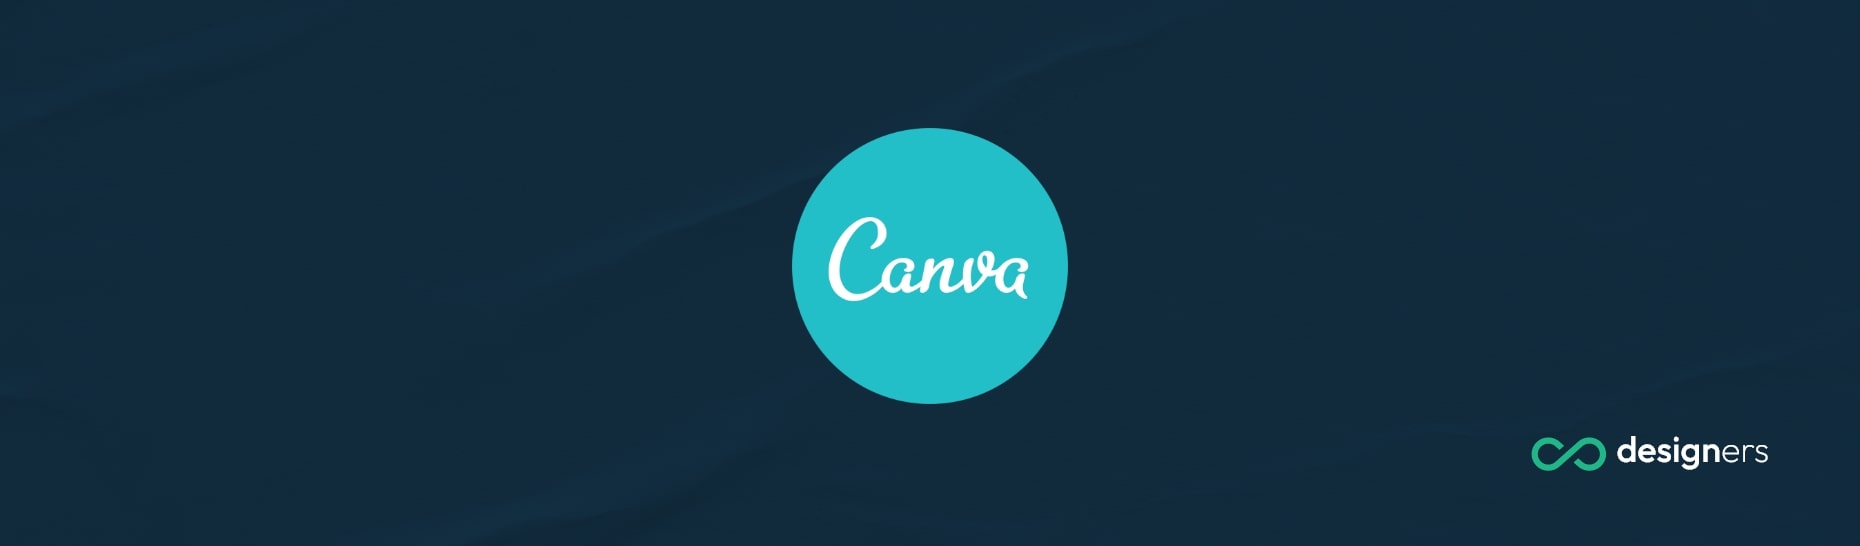 Is Canva on the Stock Market?